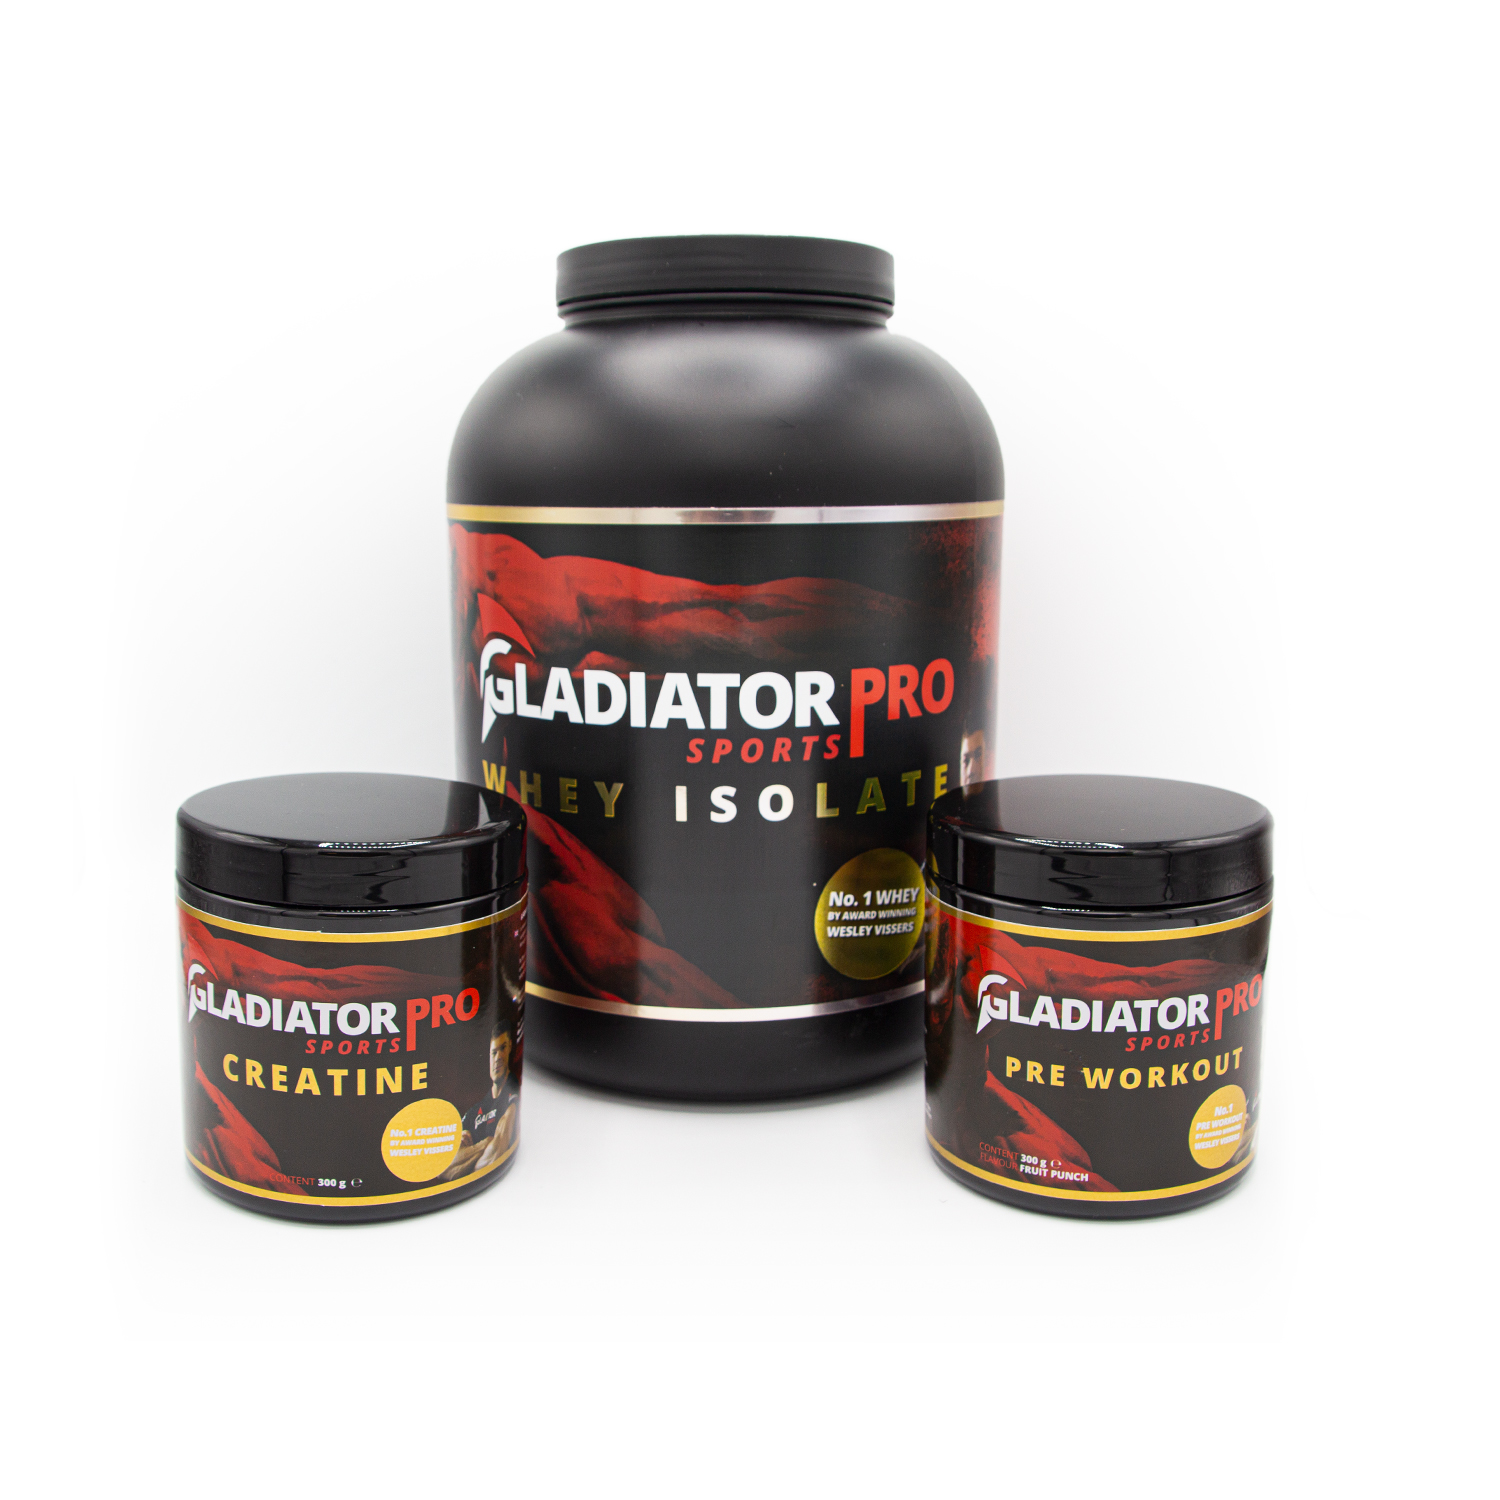 Gladiator Pro Package